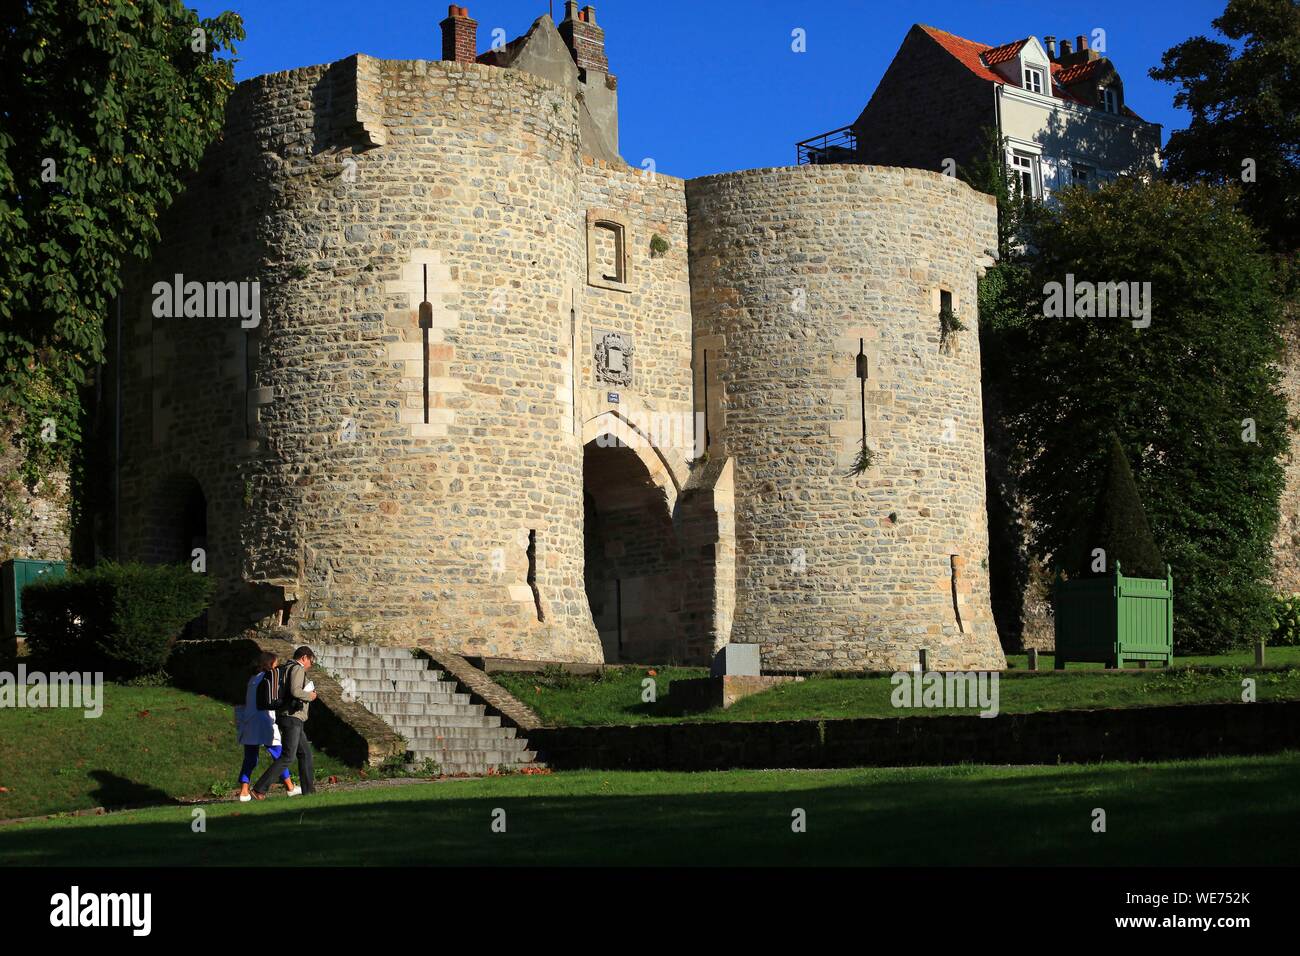 France, Pas de Calais, Boulogne sur Mer, The Gayole Gate at the ramparts of the upper town of Boulogne sur Mer Stock Photo